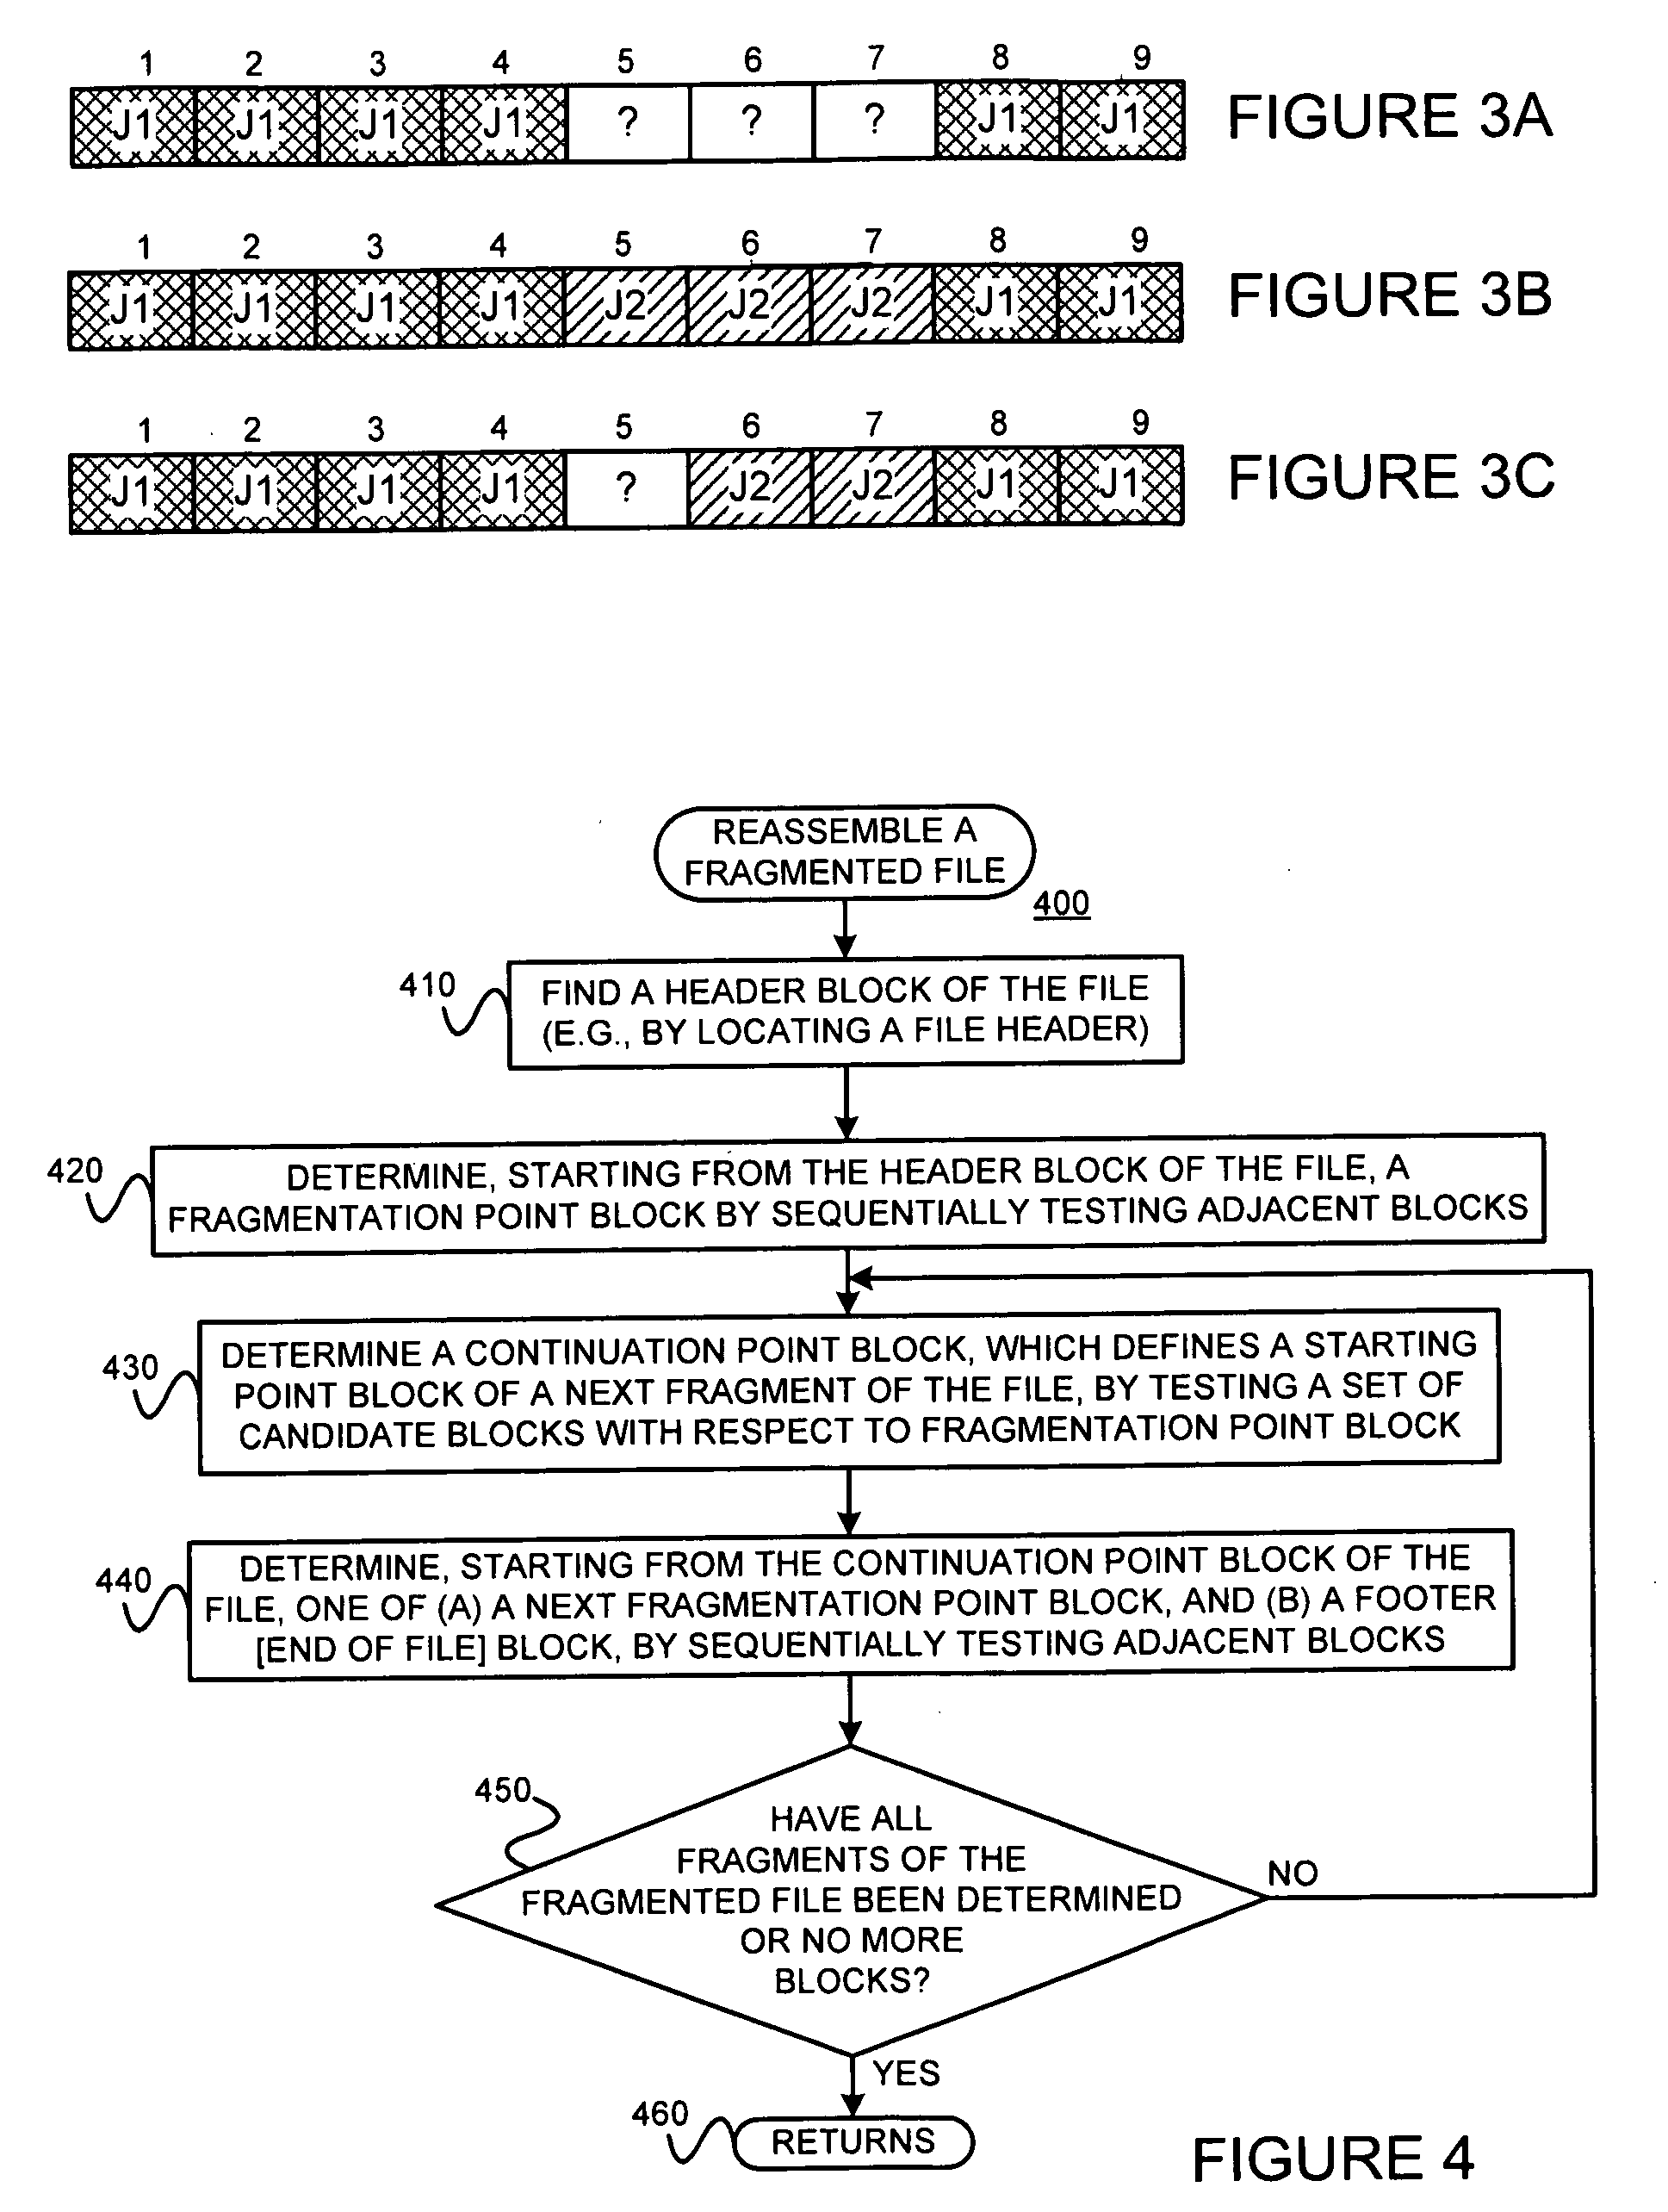 Detecting a file fragmentation point for reconstructing fragmented files using sequential hypothesis testing